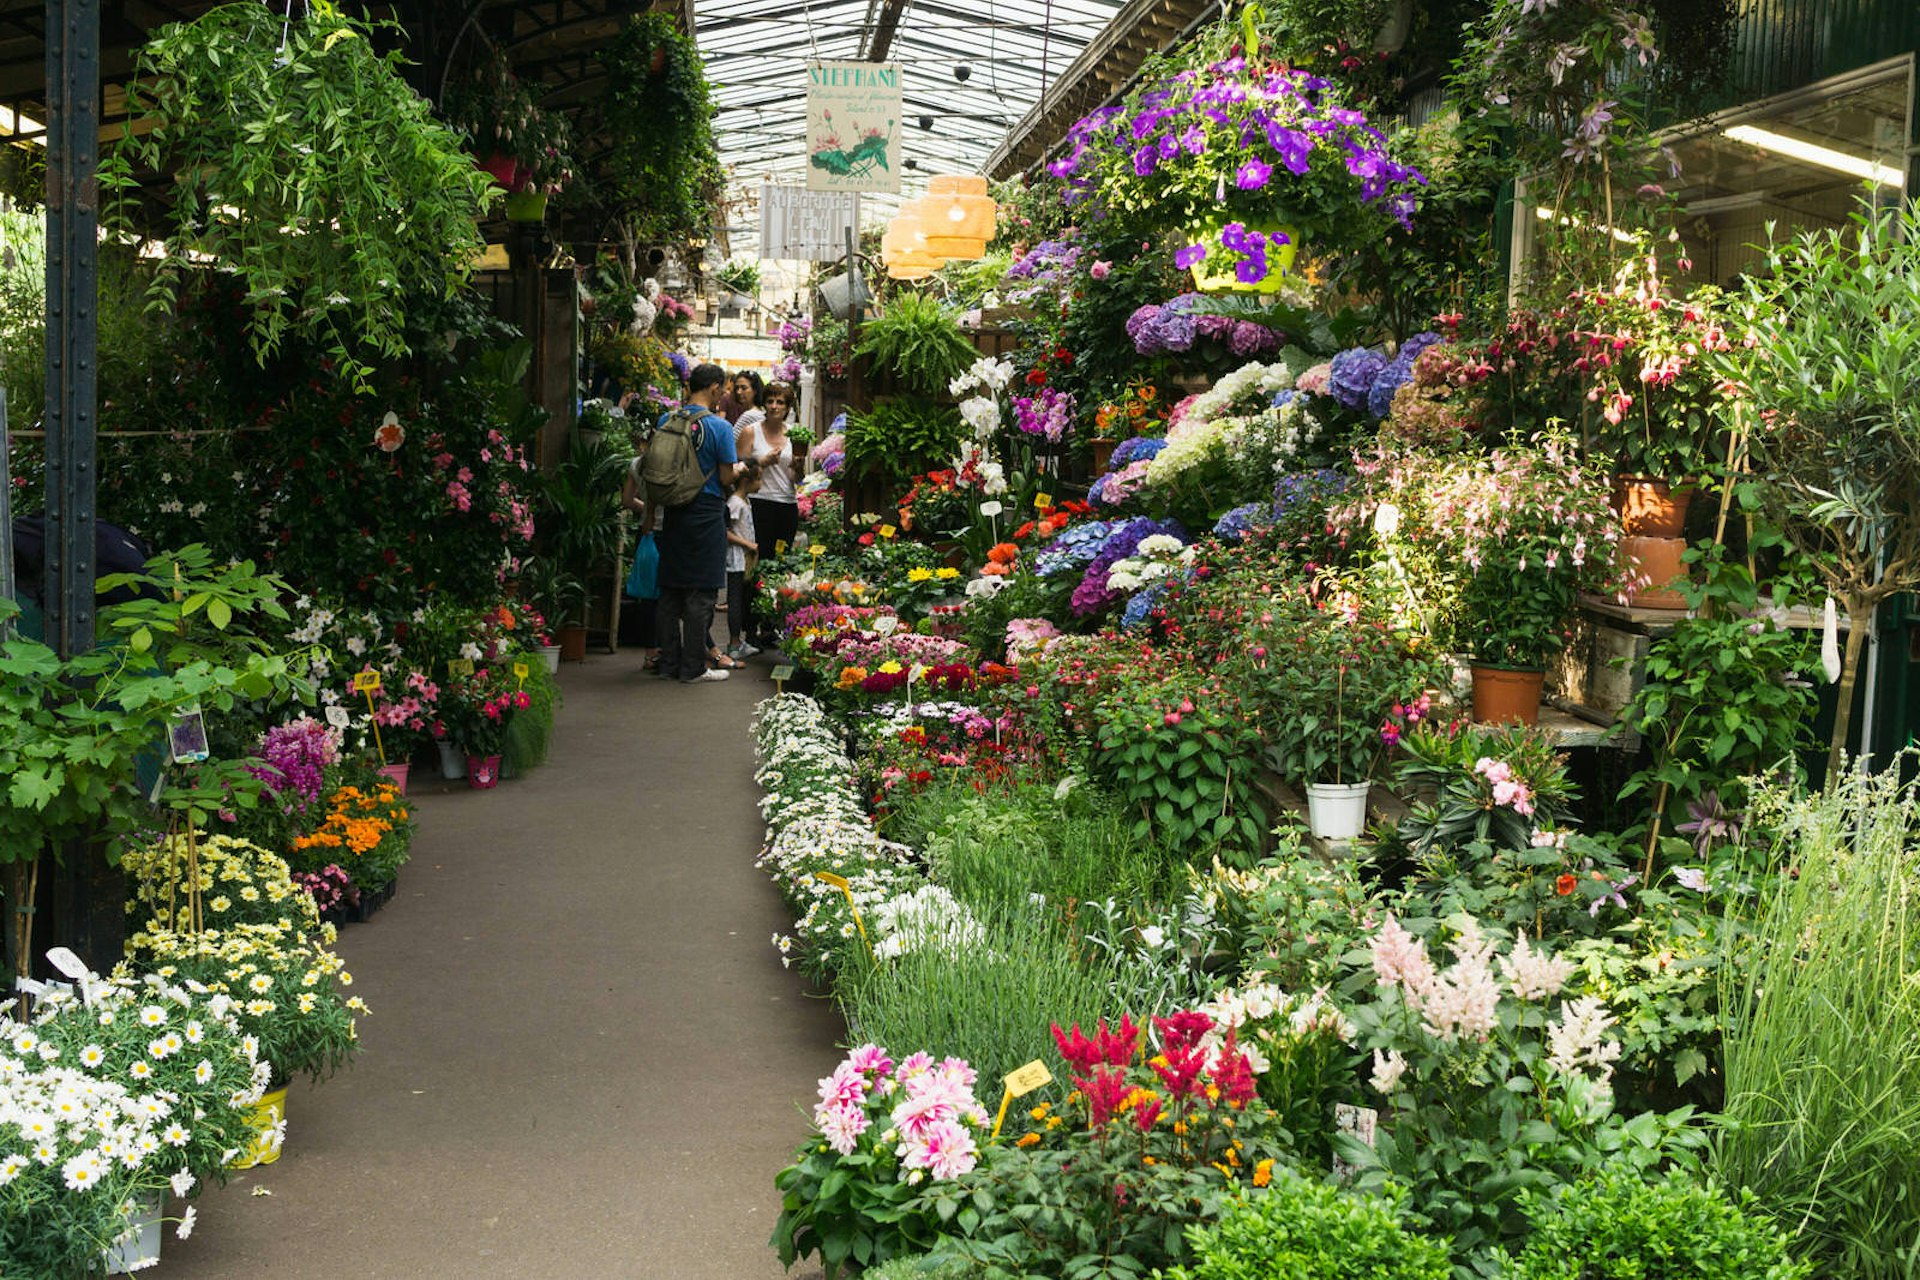 The stalls in this covered market are lined with flowers and greenery